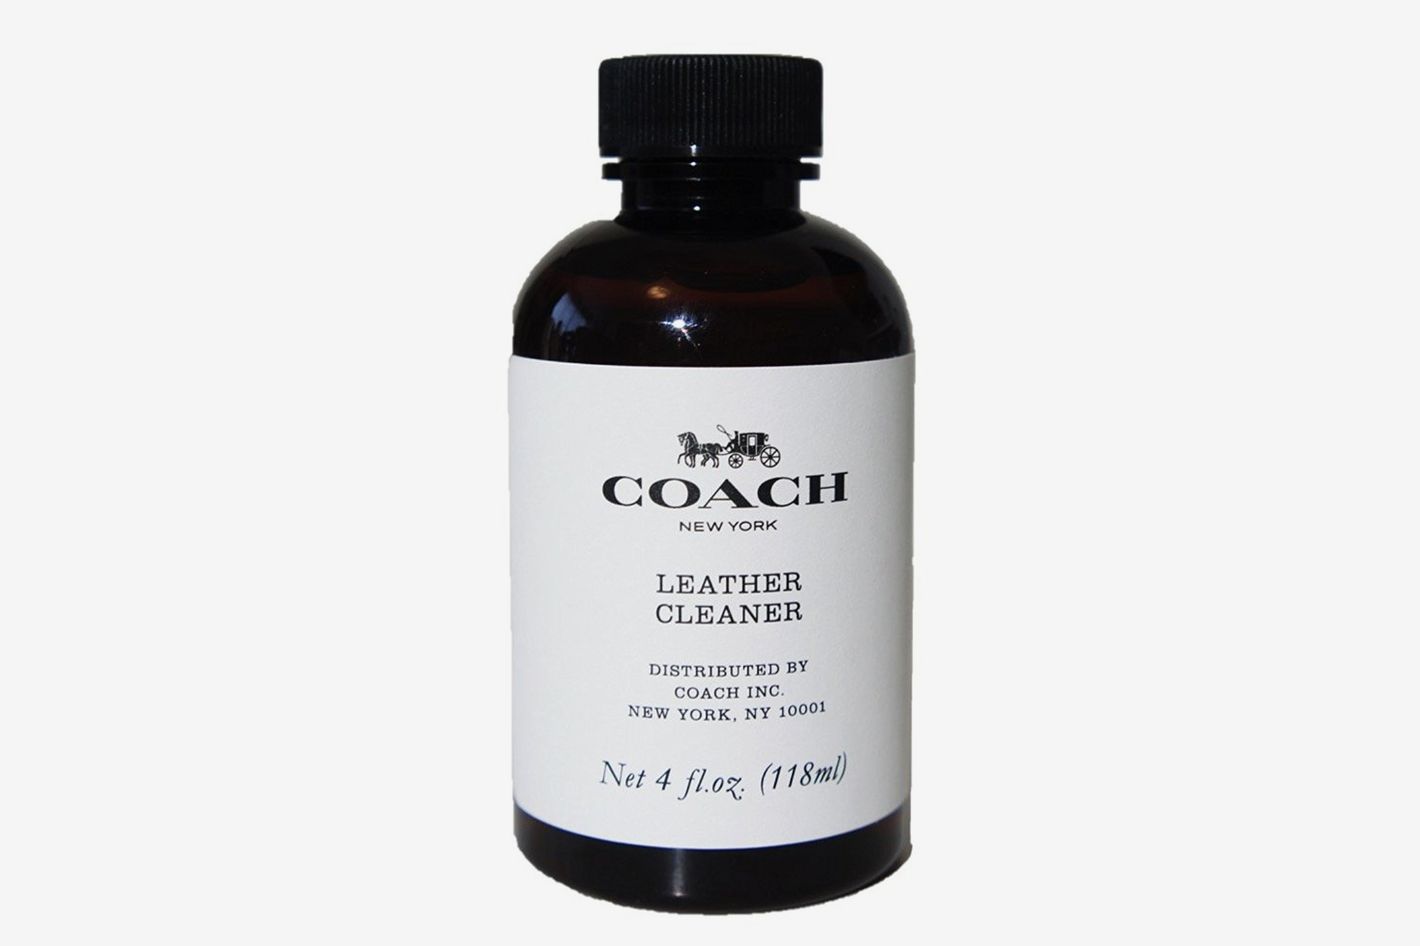  Customer reviews: Leather Purse Cleaner & Conditioner for  Handbags, Designer Bags, and Luxury Purses, Recommended Leather Cleaner for  Handbags & Leather Conditioner for Purses by Combat Cleaner